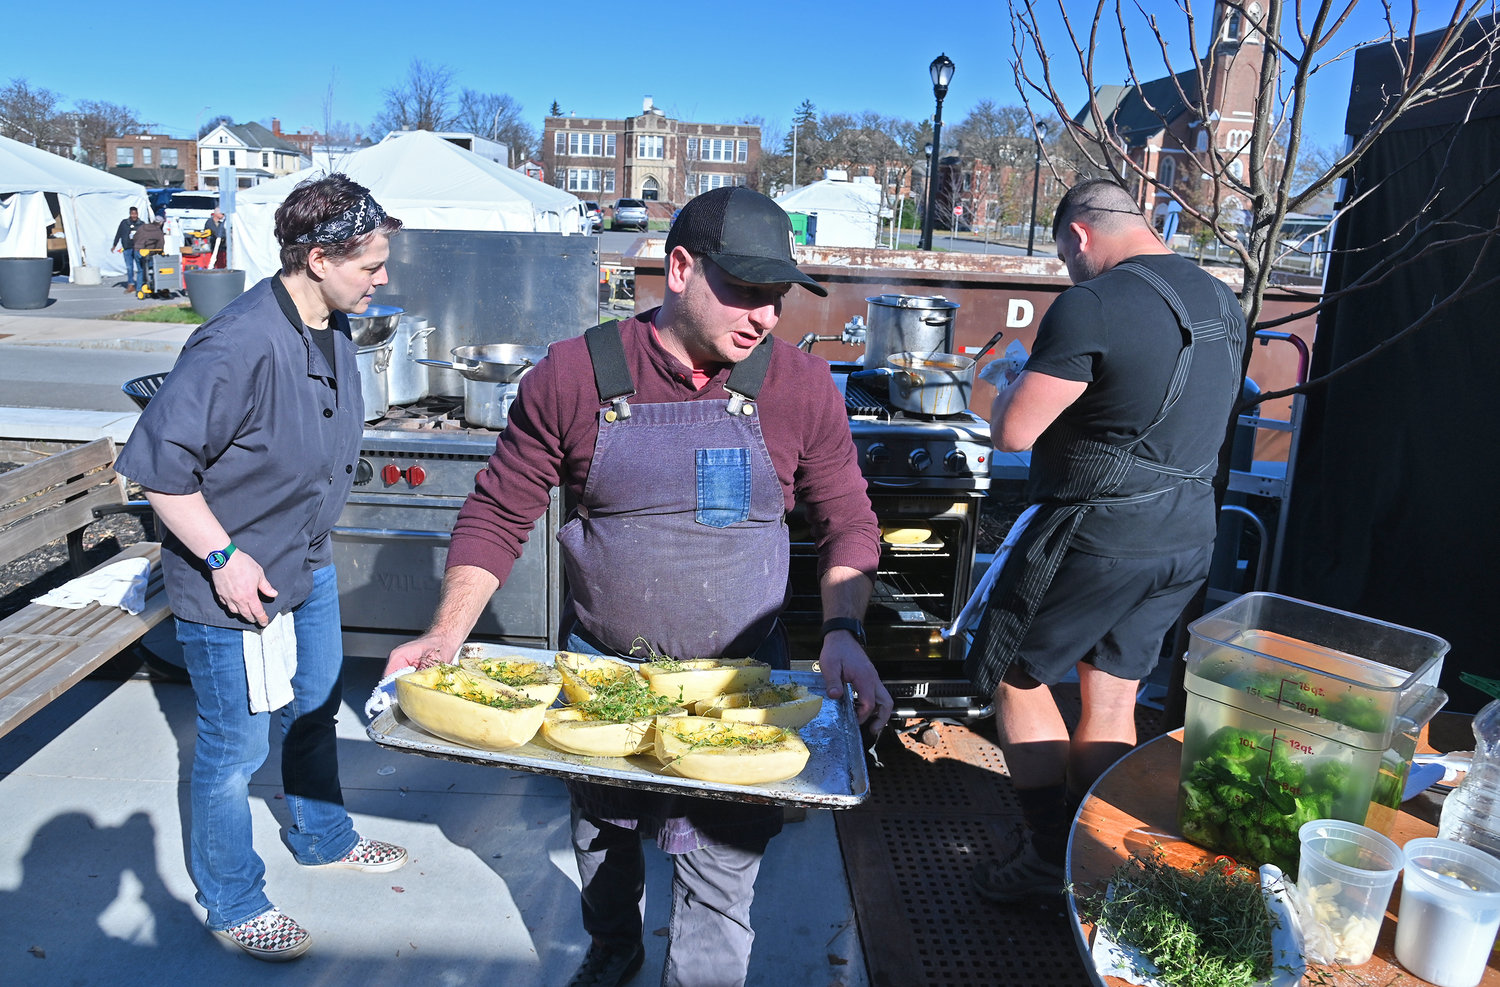 Restuarant Impossible chef Brian Goodman transfers squash with Chef Tito Marino in black working at the stove. On the left is Michelle Willson of Camden who volunteered to help with preparation for the show on Nov. 9, 2022.